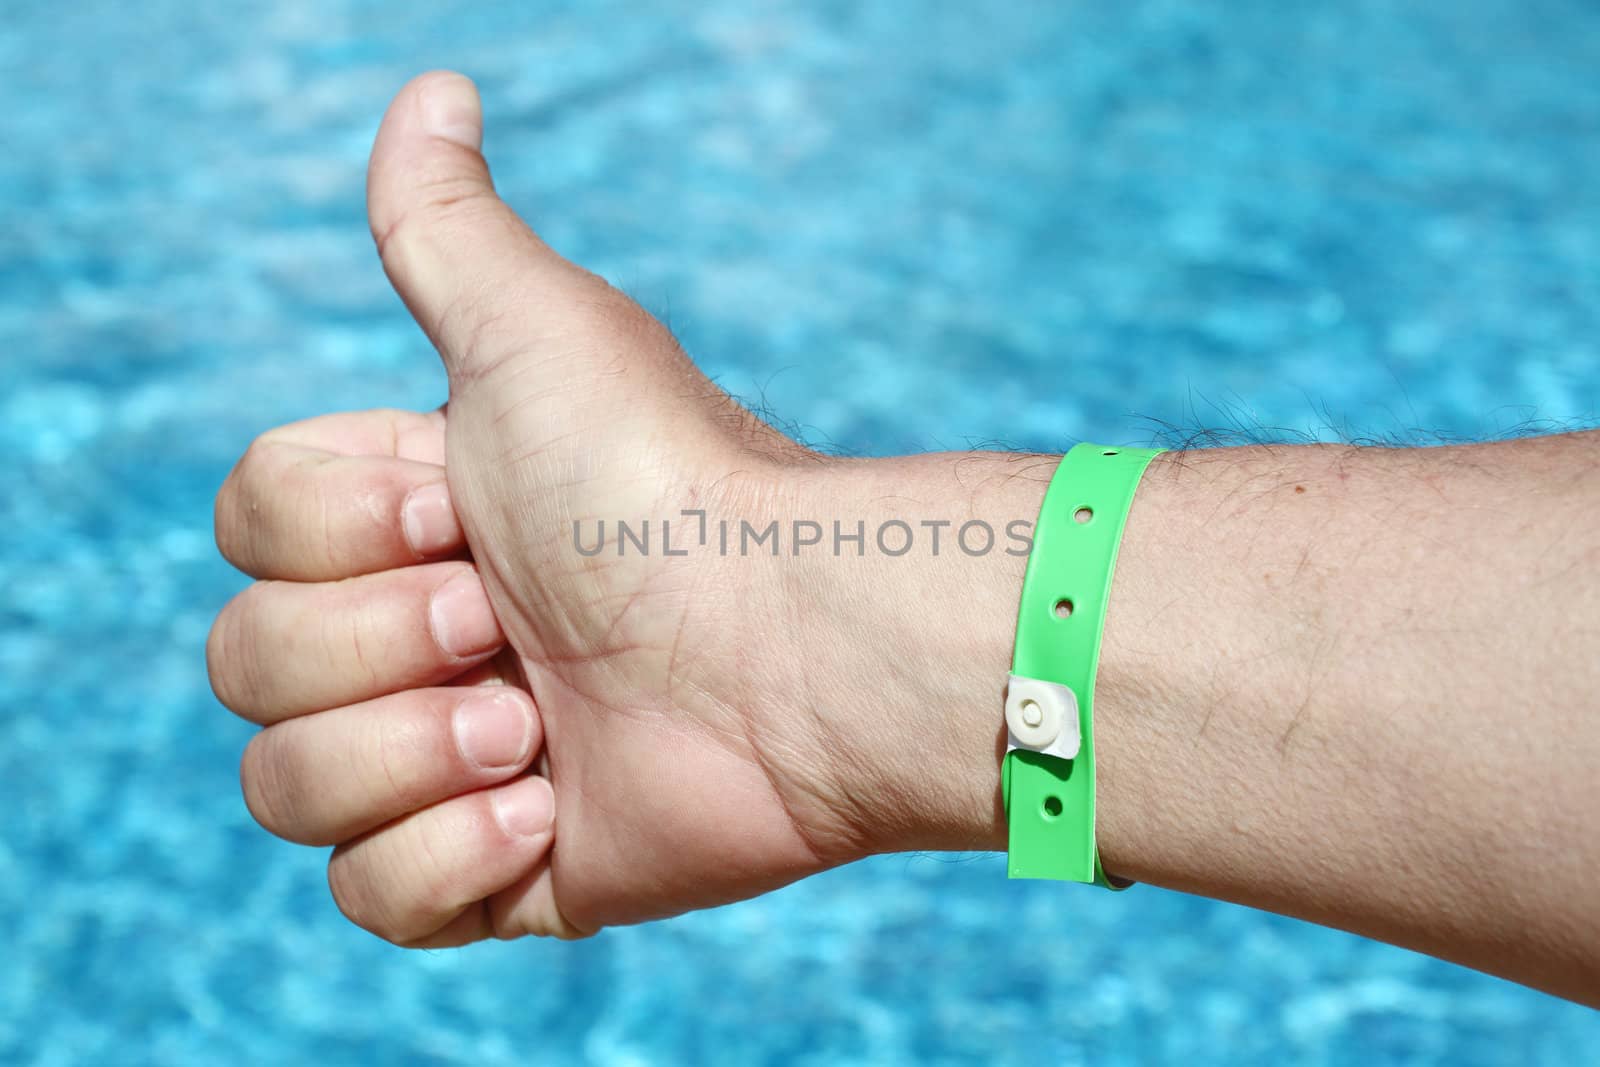 thumbs up sign over water background. Holiday concept